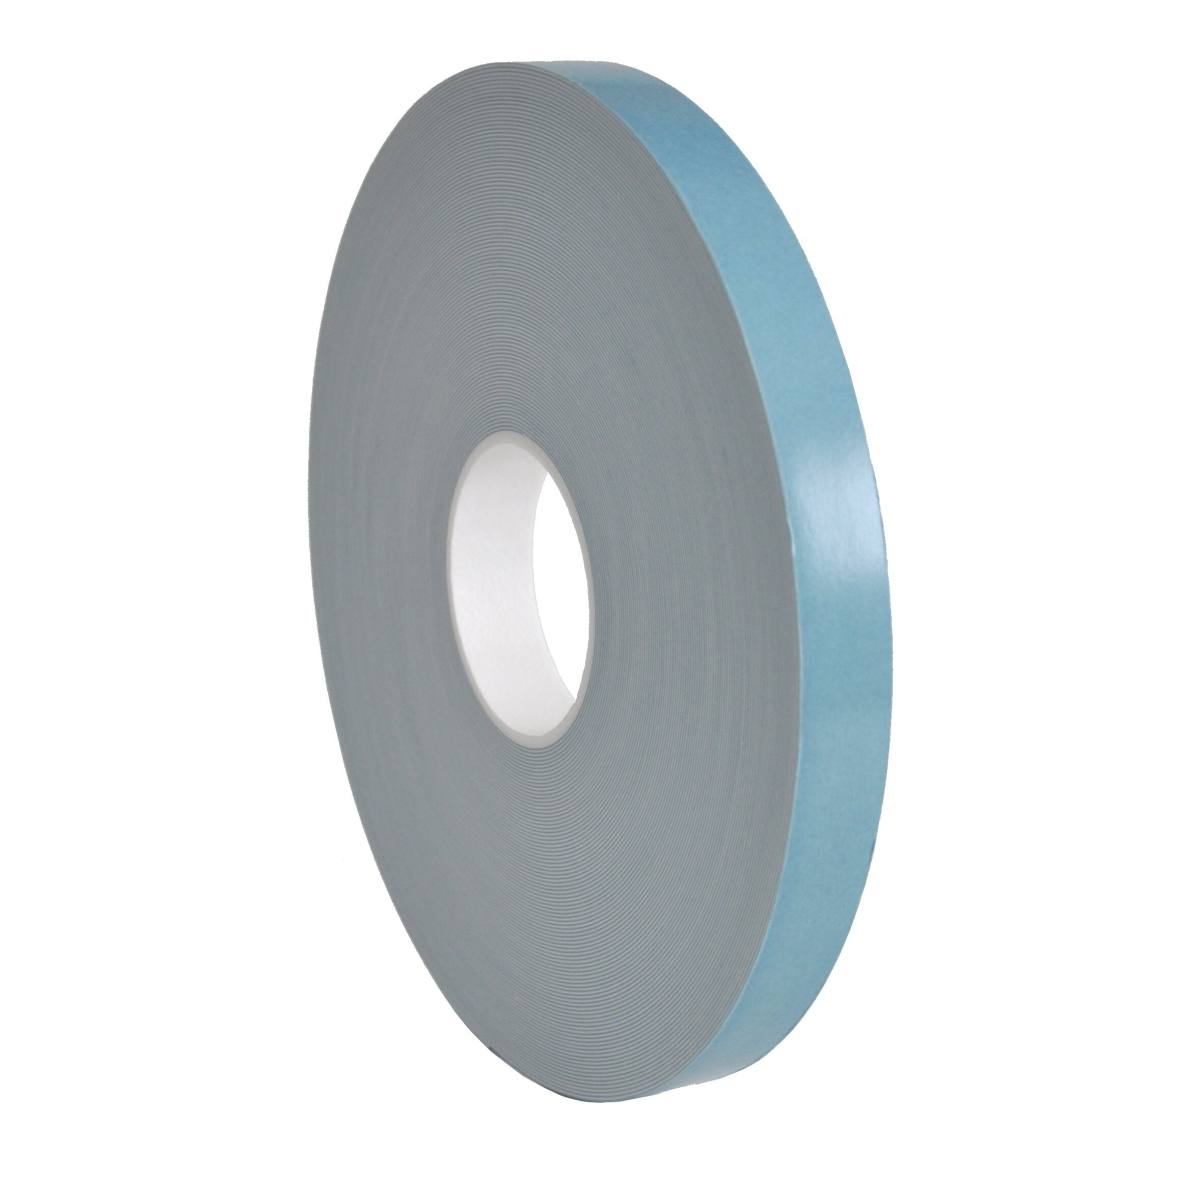 S-K-S 866 Double-sided PE foam adhesive tape with acrylic adhesive, 38 mm x 50 m, 0.8 mm, white